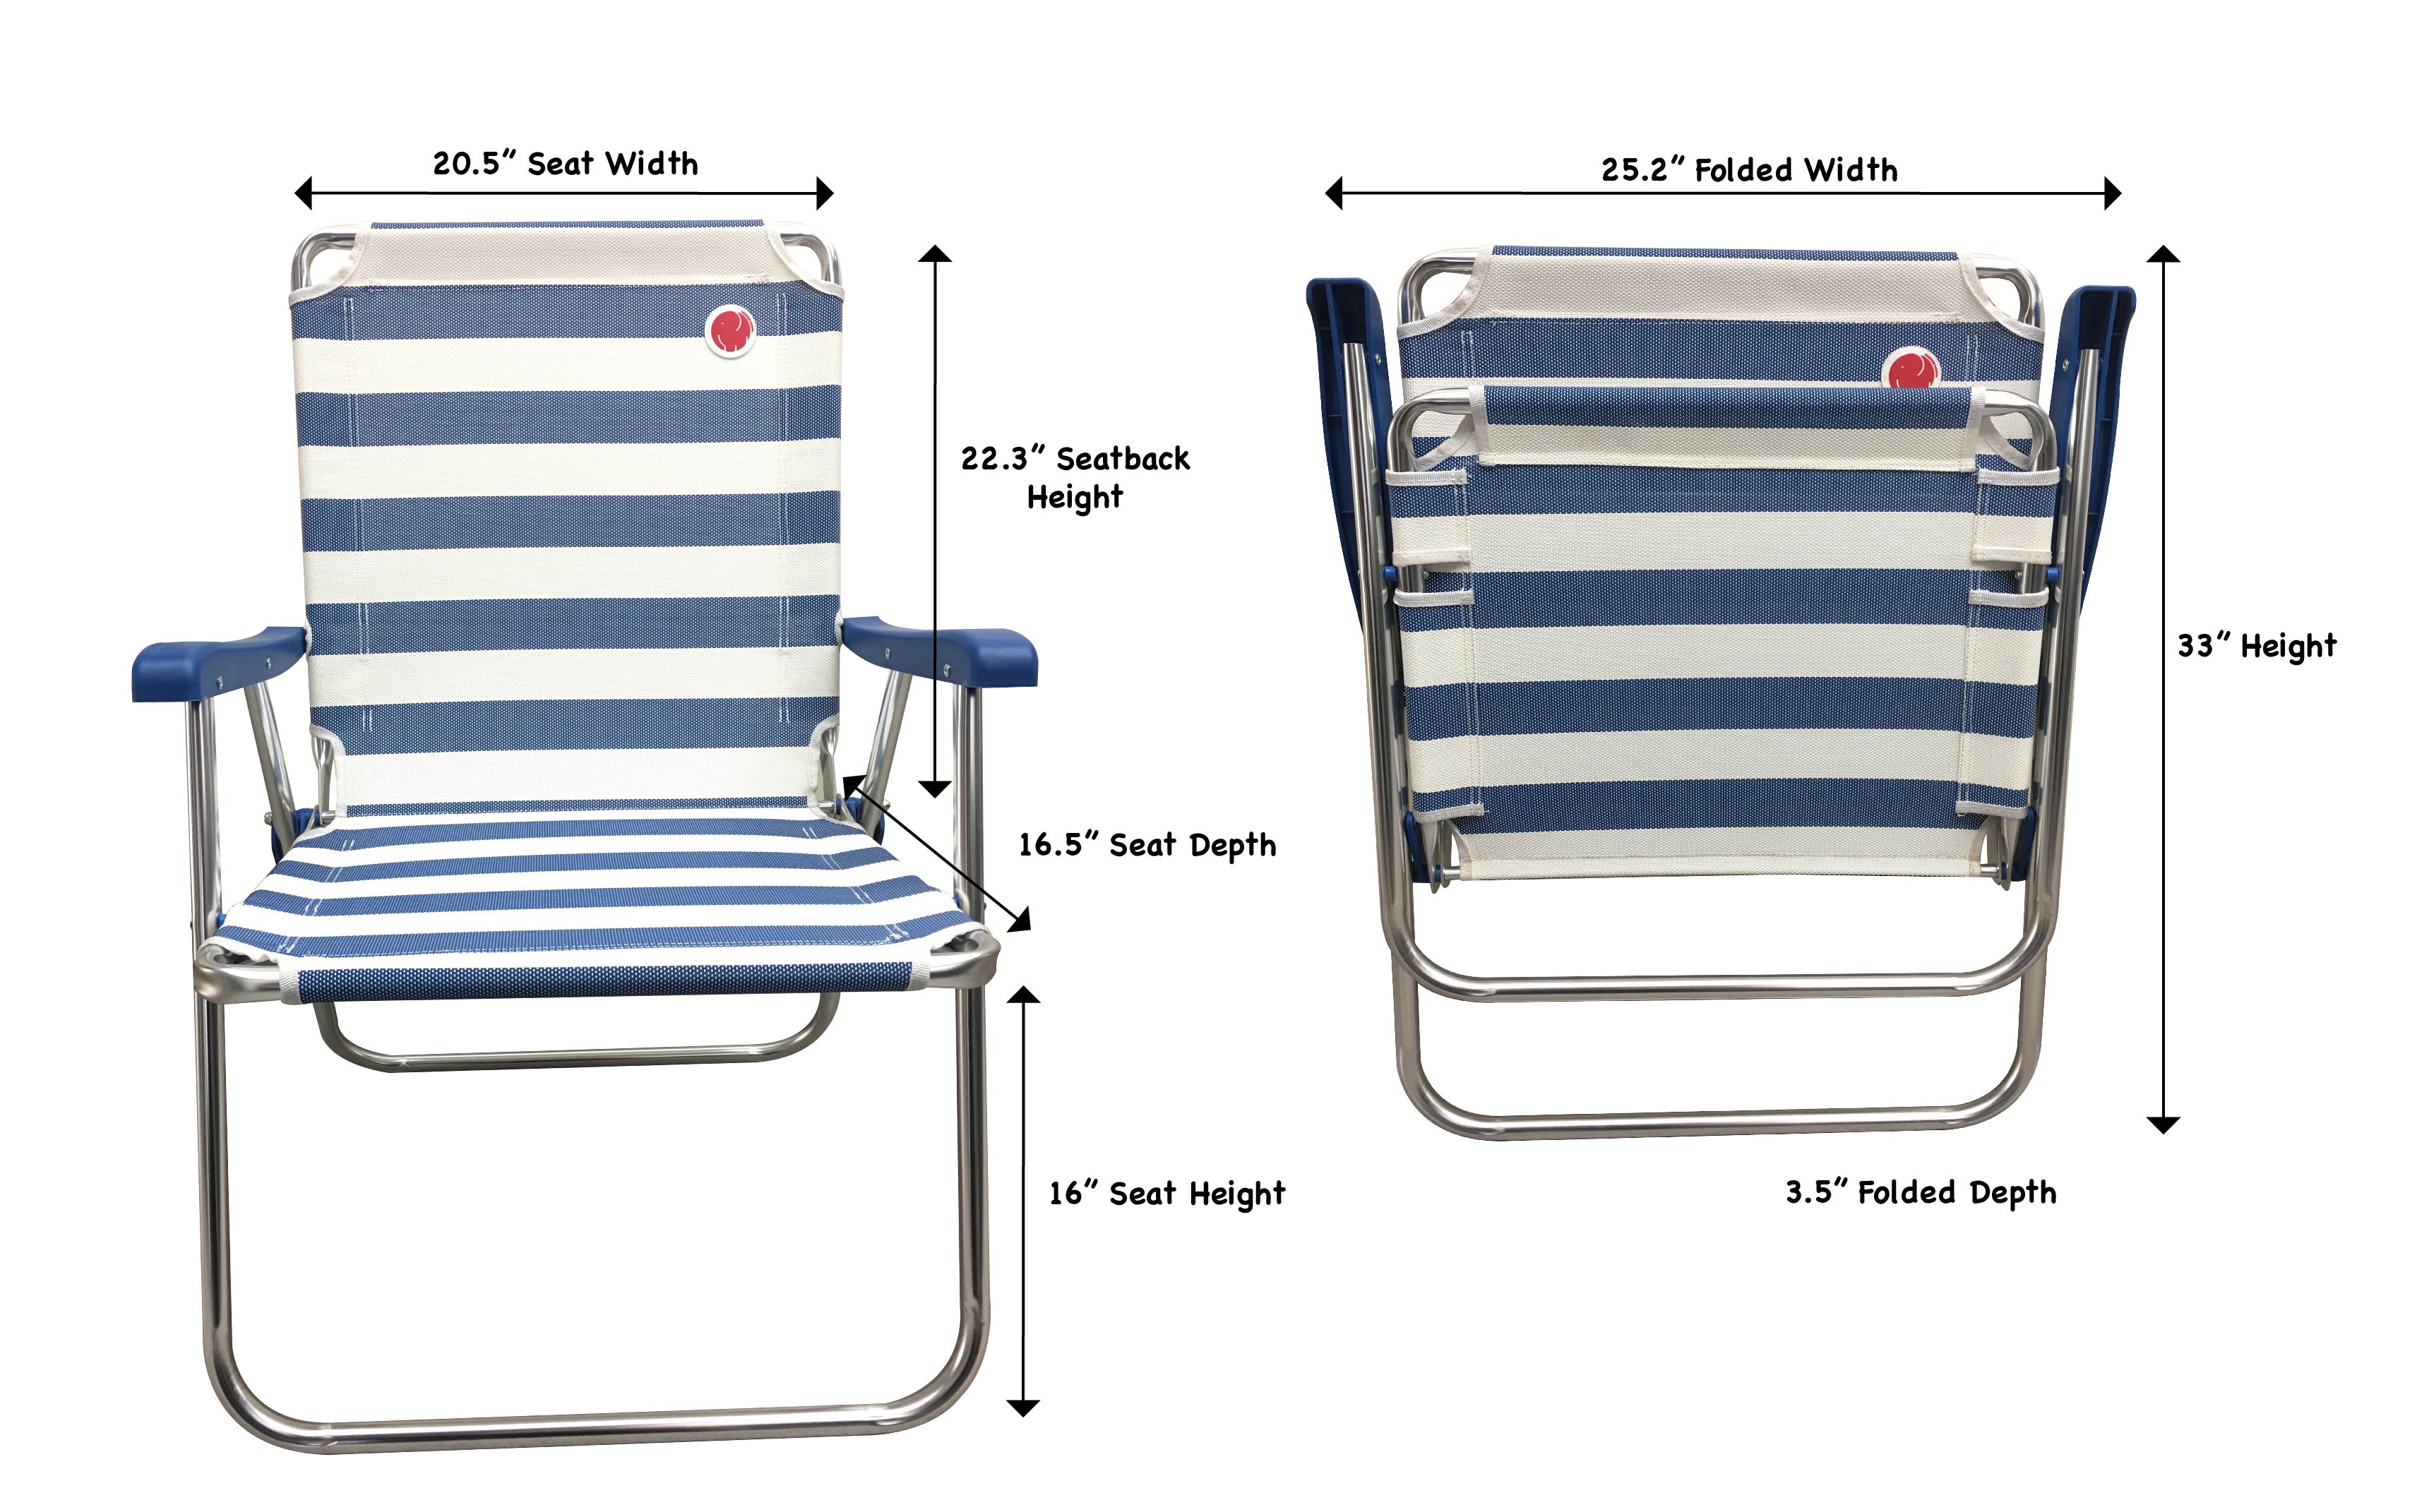 OmniCore Designs New Standard Folding Camp/Lawn Chair (2 Pack)